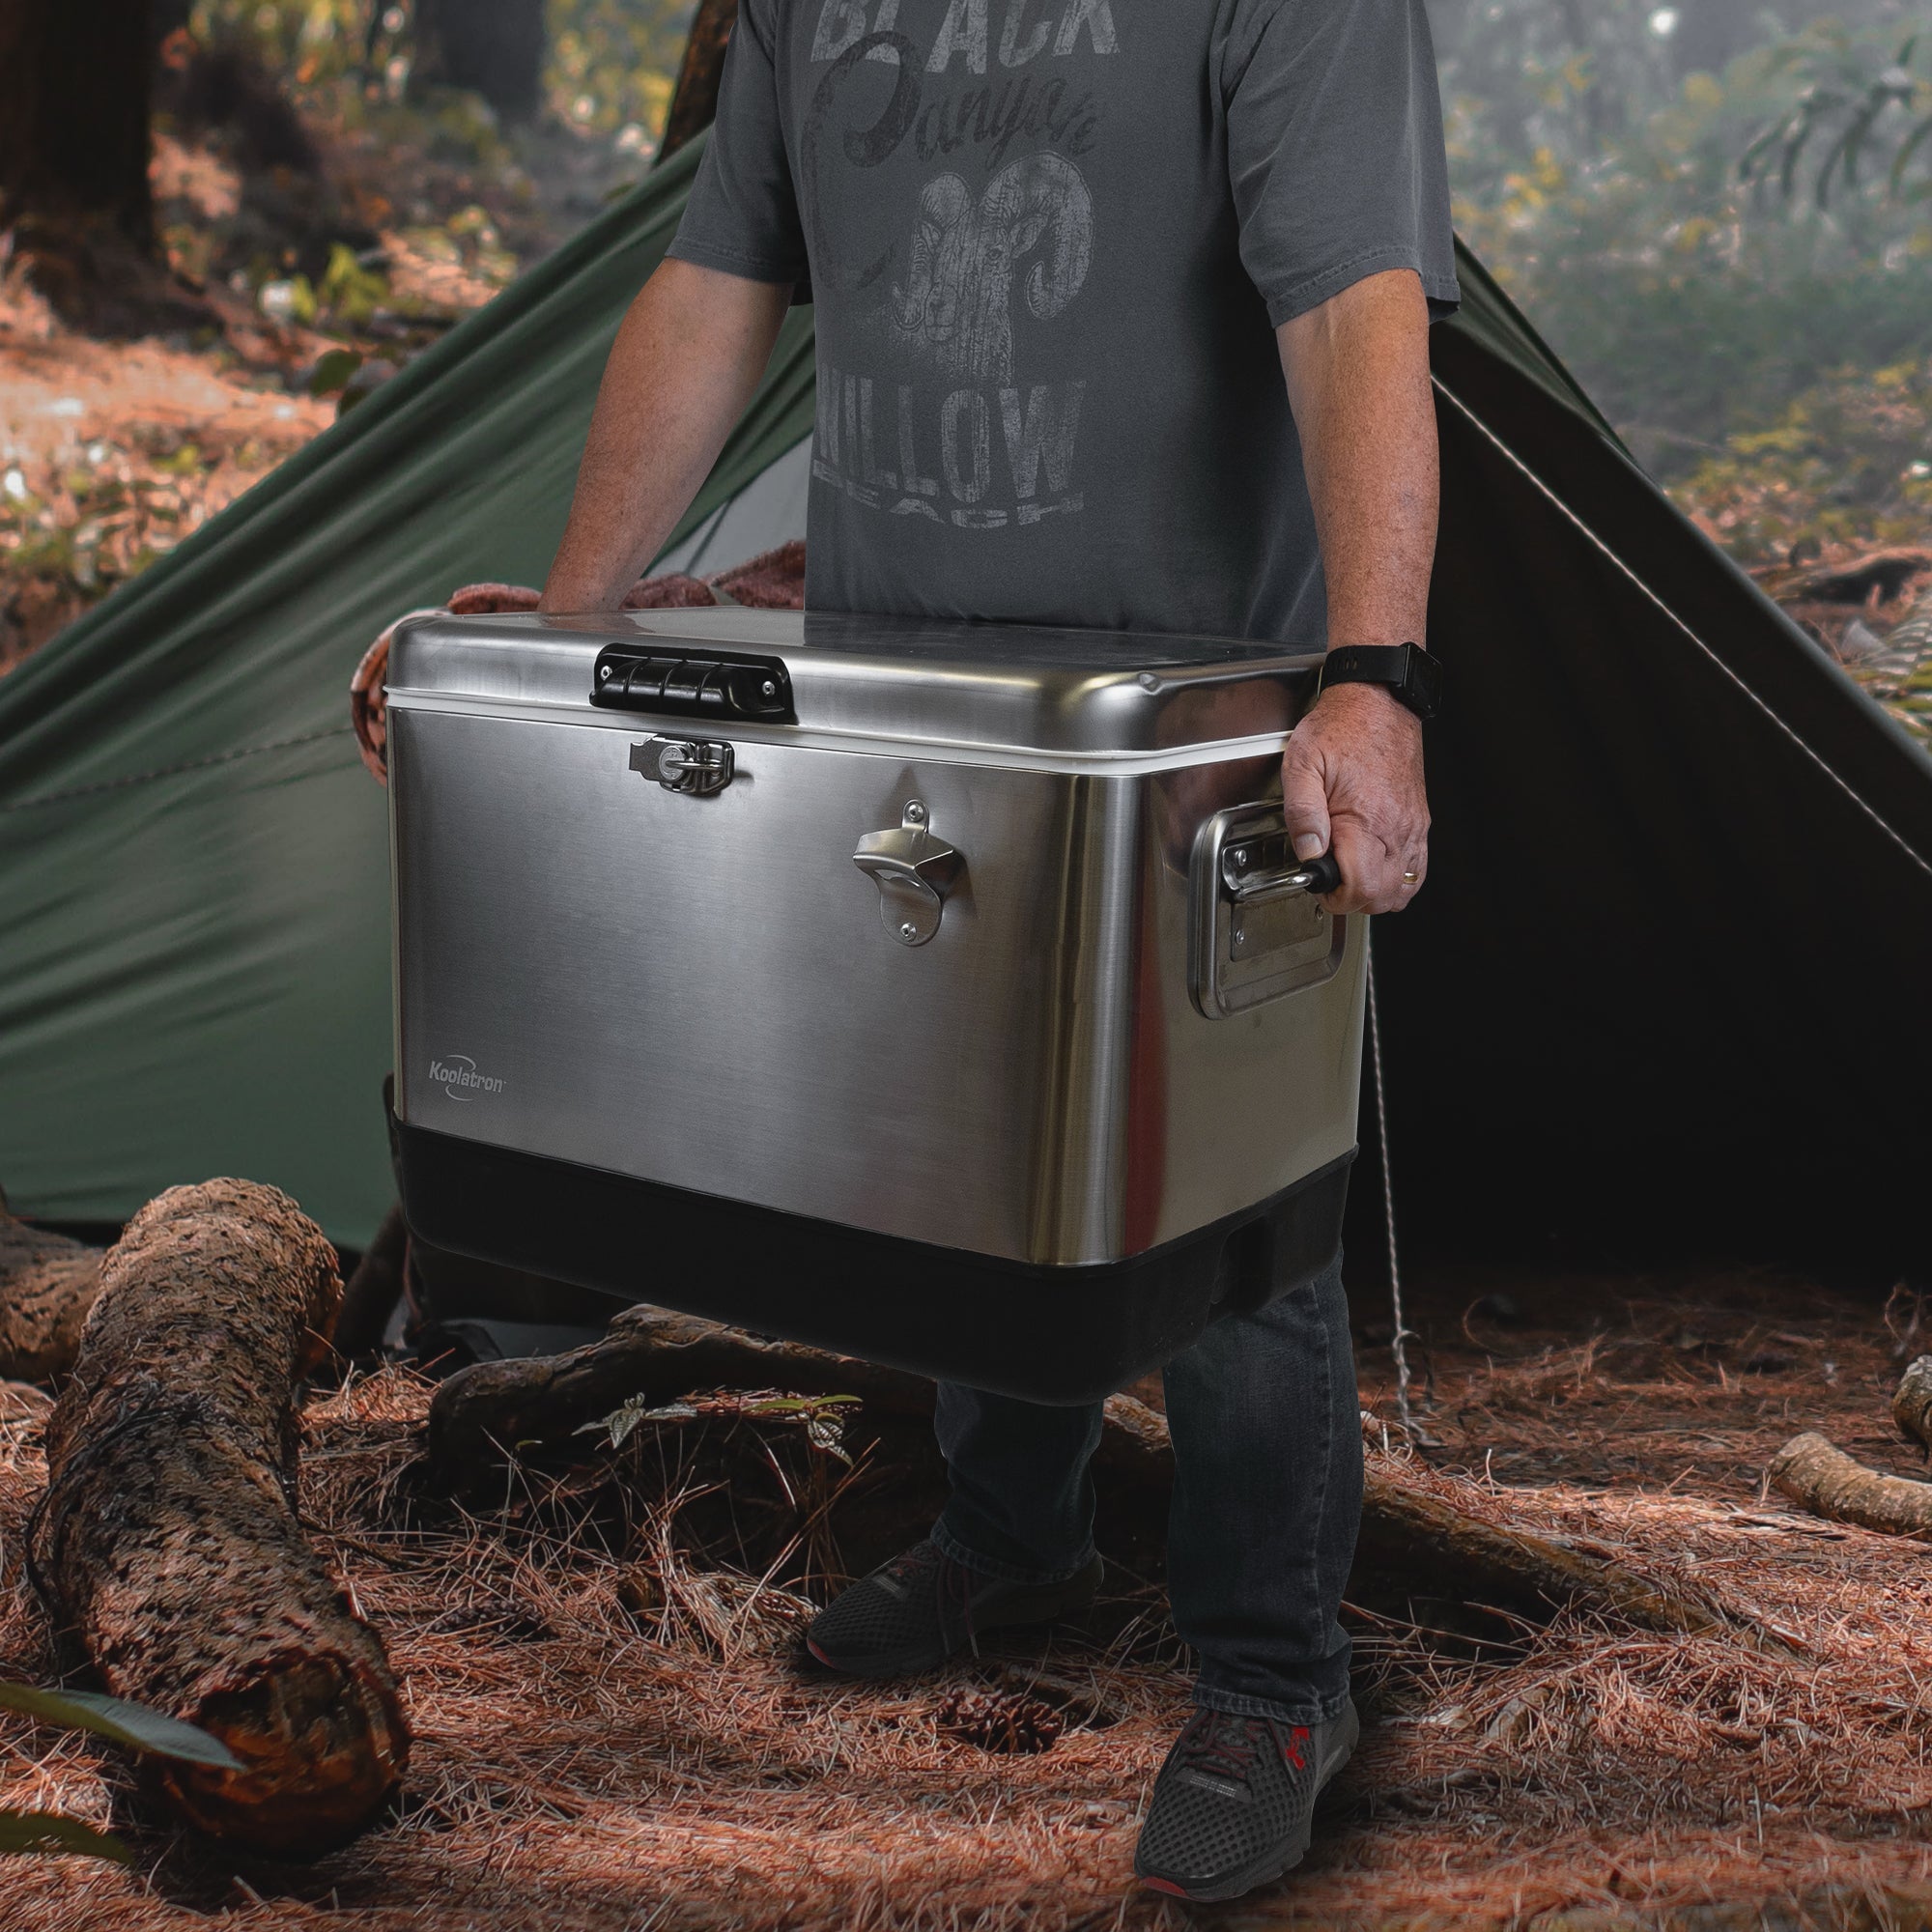 Lifestyle image of a person wearing jeans and a blue t-shirt standing up holding the Koolatron stainless steel 54 quart ice chest in front of a dark green A-frame tent